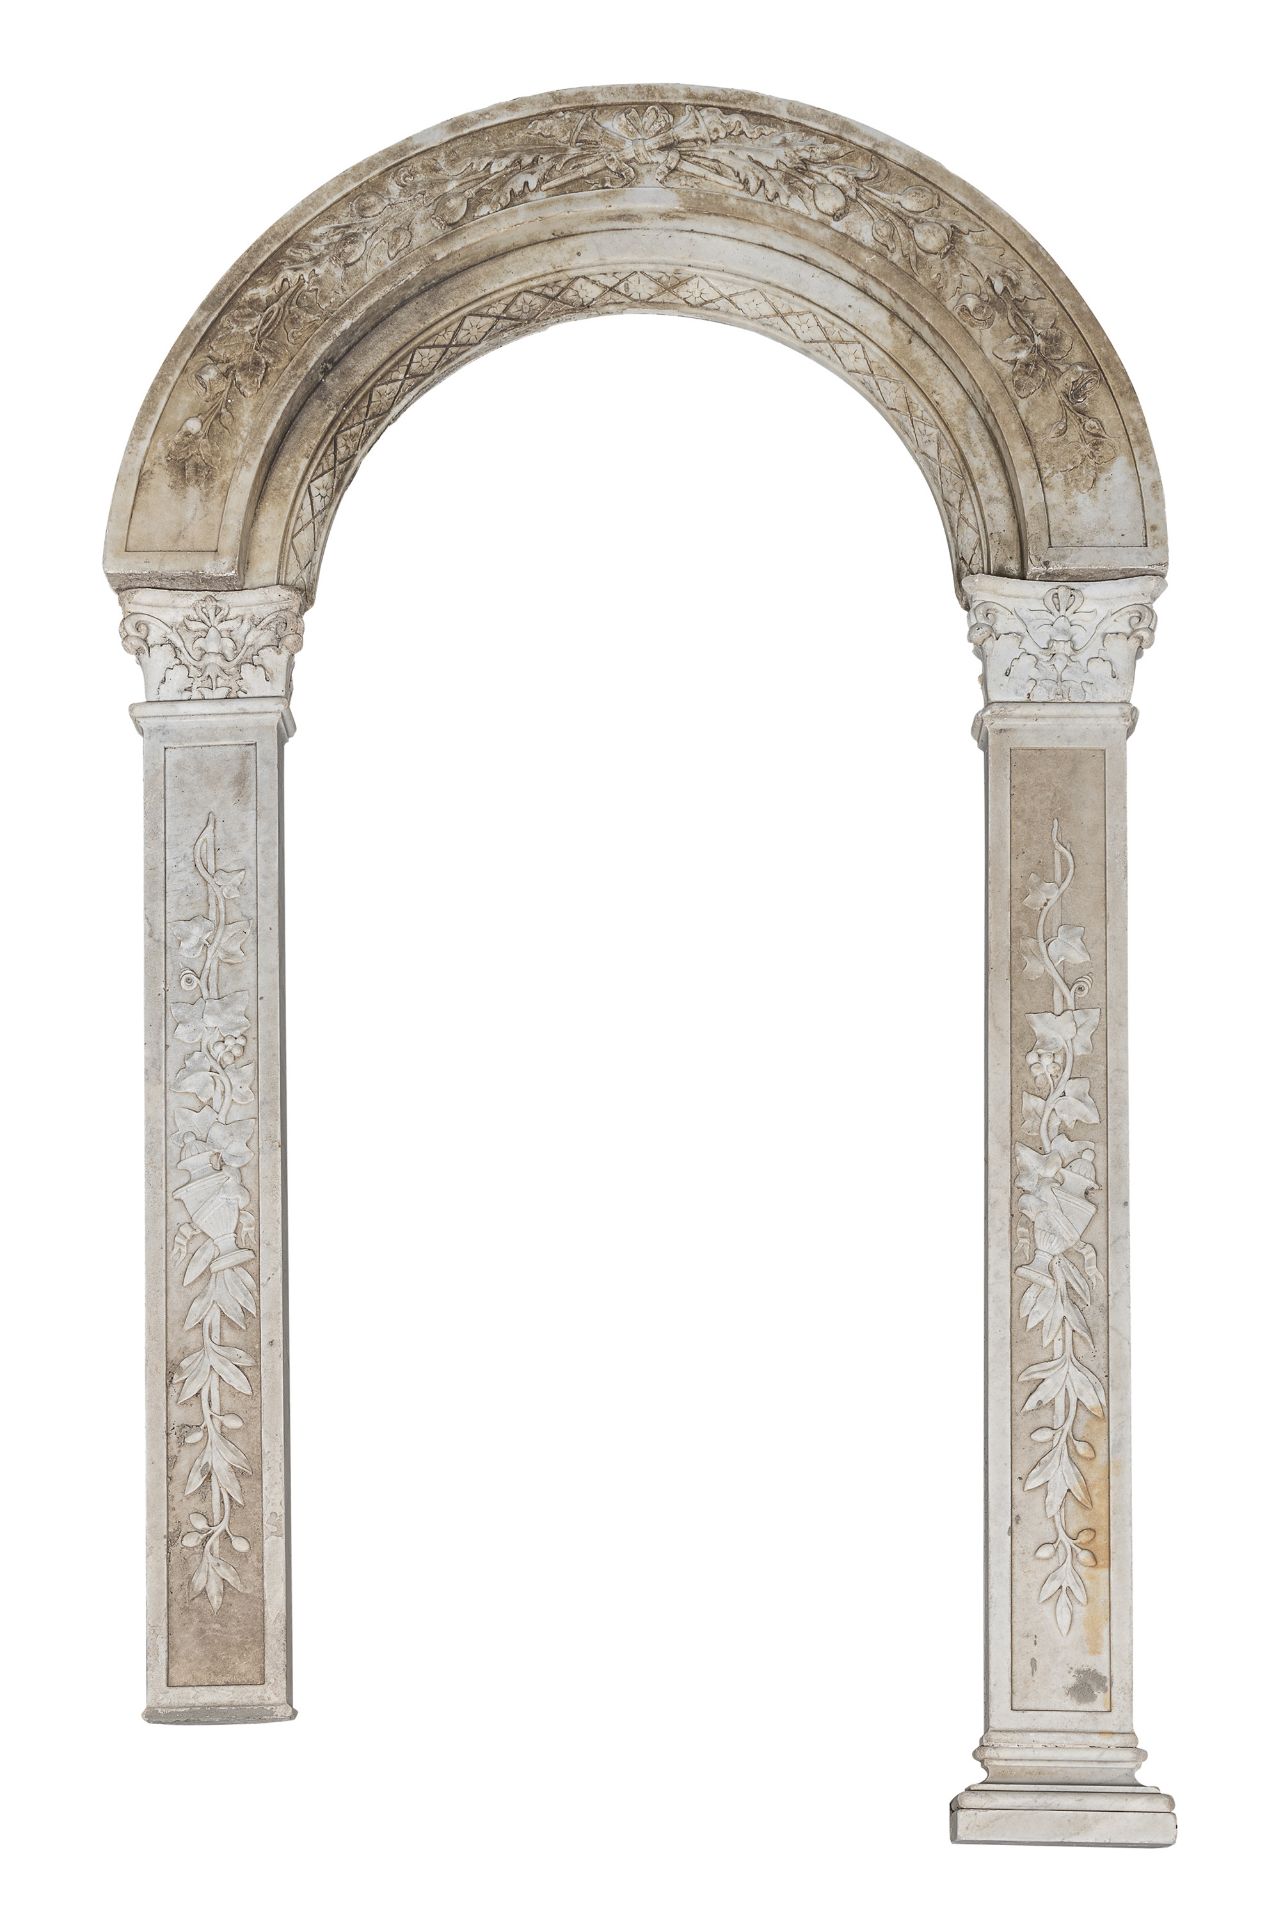 WHITE MARBLE ARCH 18TH CENTURY